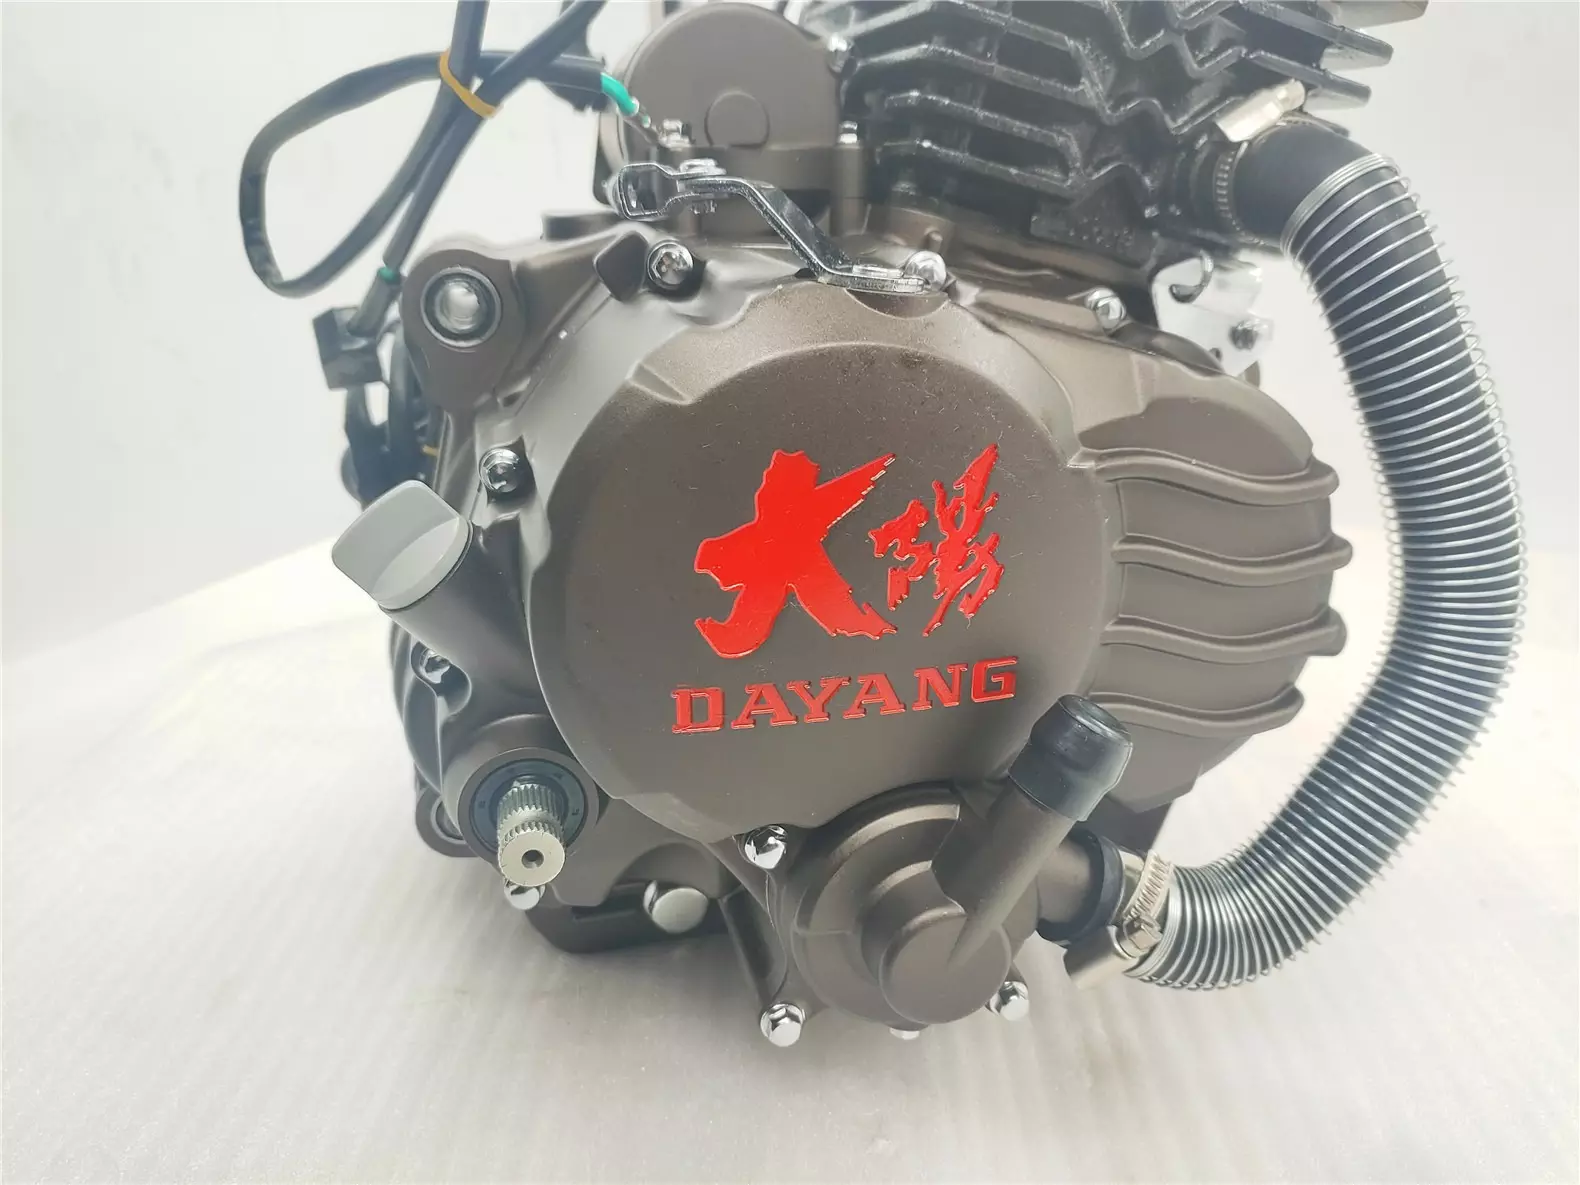 LIFAN/ZONGSHEN/LONCIN/DAYANG brand LF Wolf 250cc motorcycle engine water cooled 4 stroke motorcycle engine